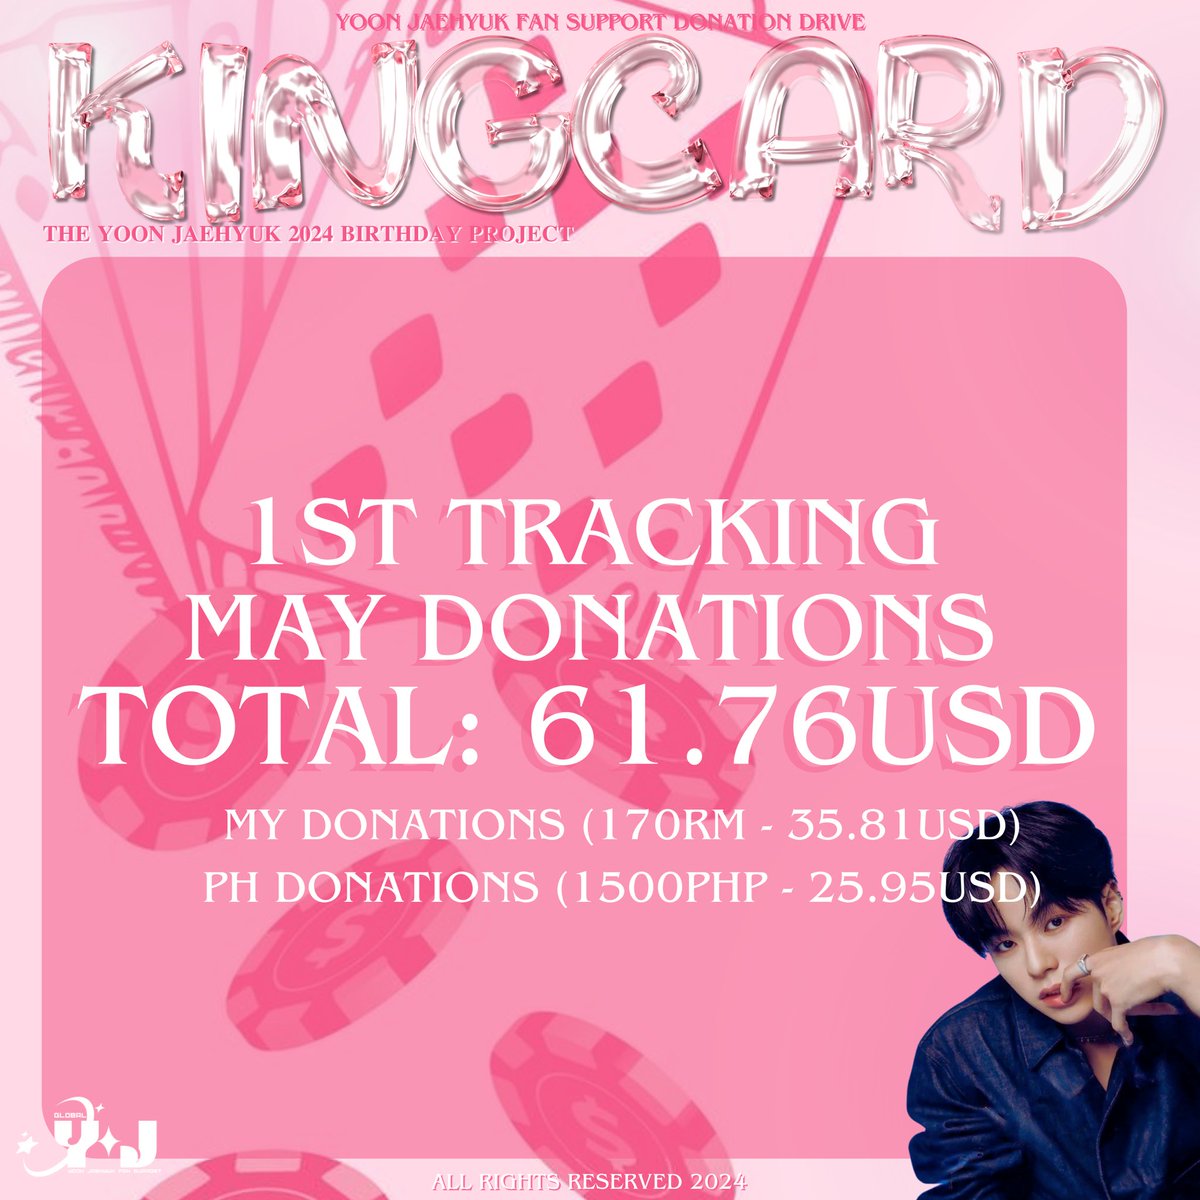 [💰] KINGCARD’S SAVINGS - FIRST TRACKING (05/1-05/12) Please donate any amount for Yoon Jaehyuk! We're still far from our goal. We will reveal the birthday project plans once we reached 20% 💕 MAY GOAL - 500USD 💰paypal.me/globalyjfs 📥 tinyurl.com/jaehyuksavings…